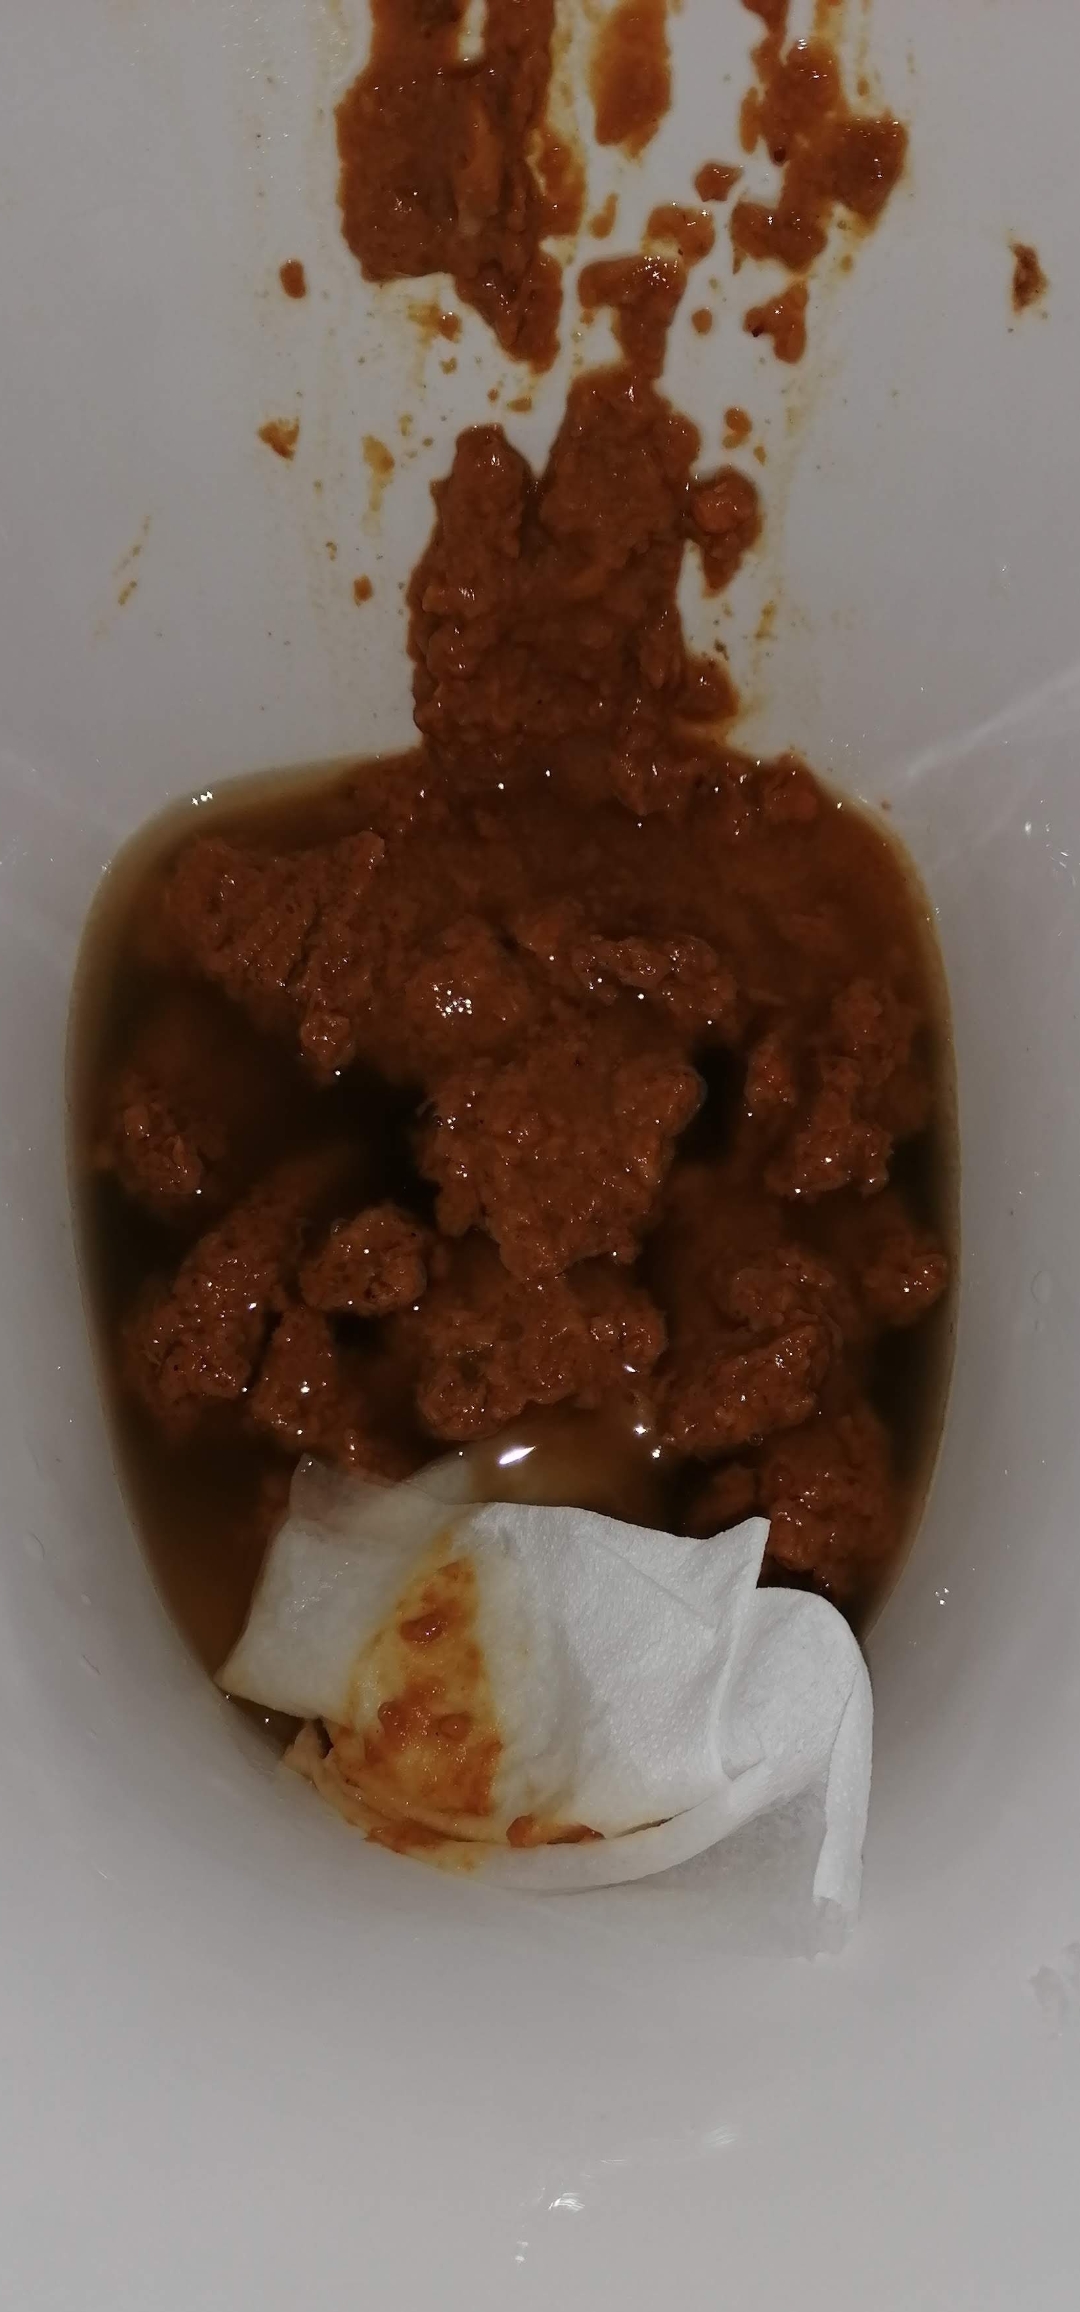 Big sloppy shit on my mates loo before work not long ago